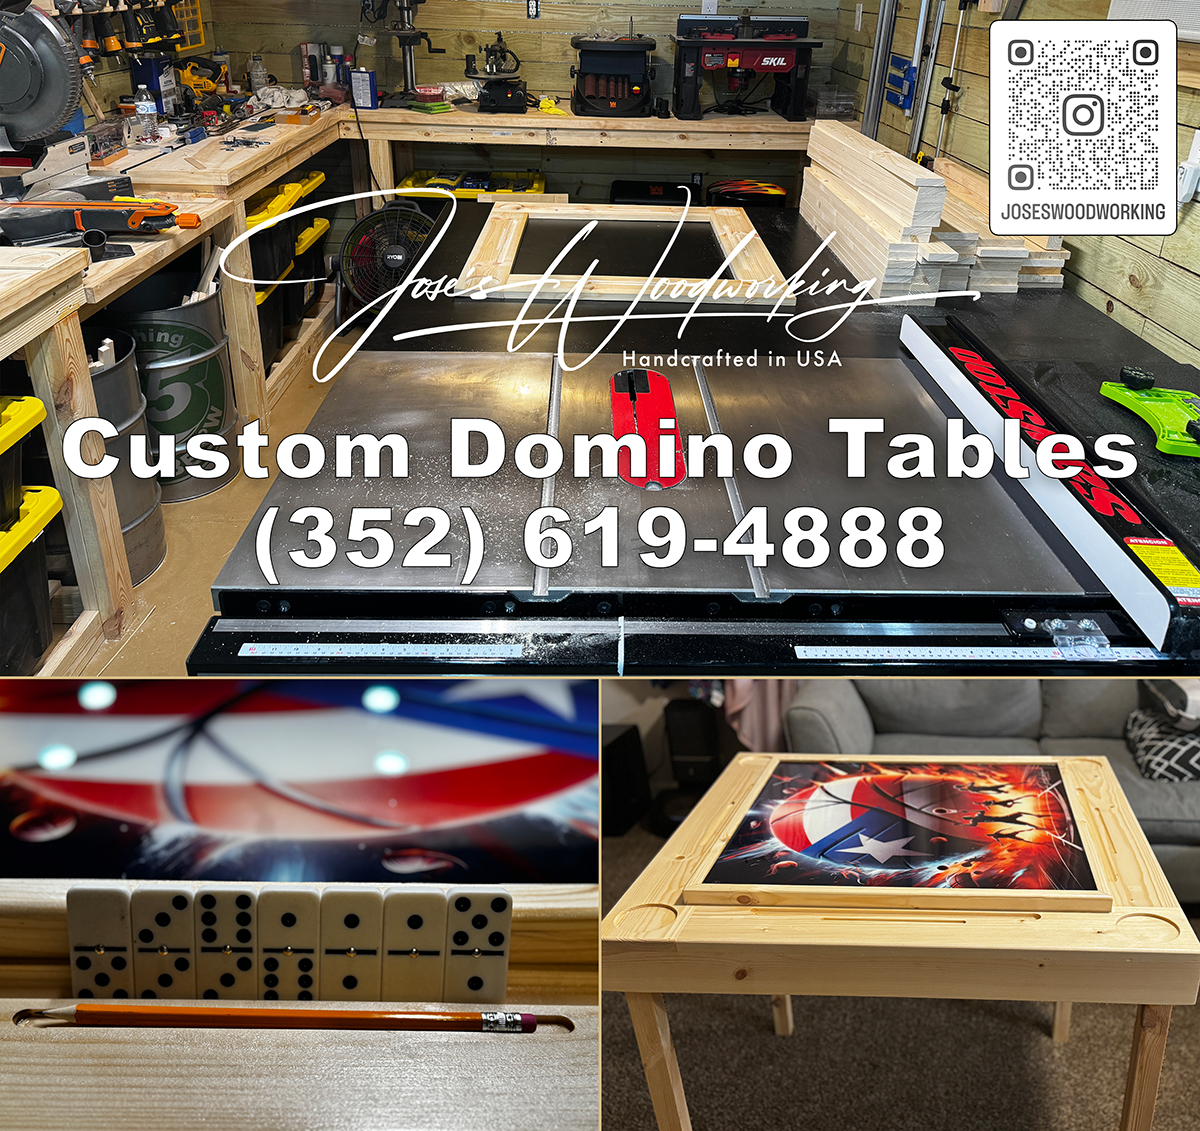 Jose’s Woodworking Partners with HD Print & Marketing to Elevate Artisan Domino Tables with Stunning Visuals